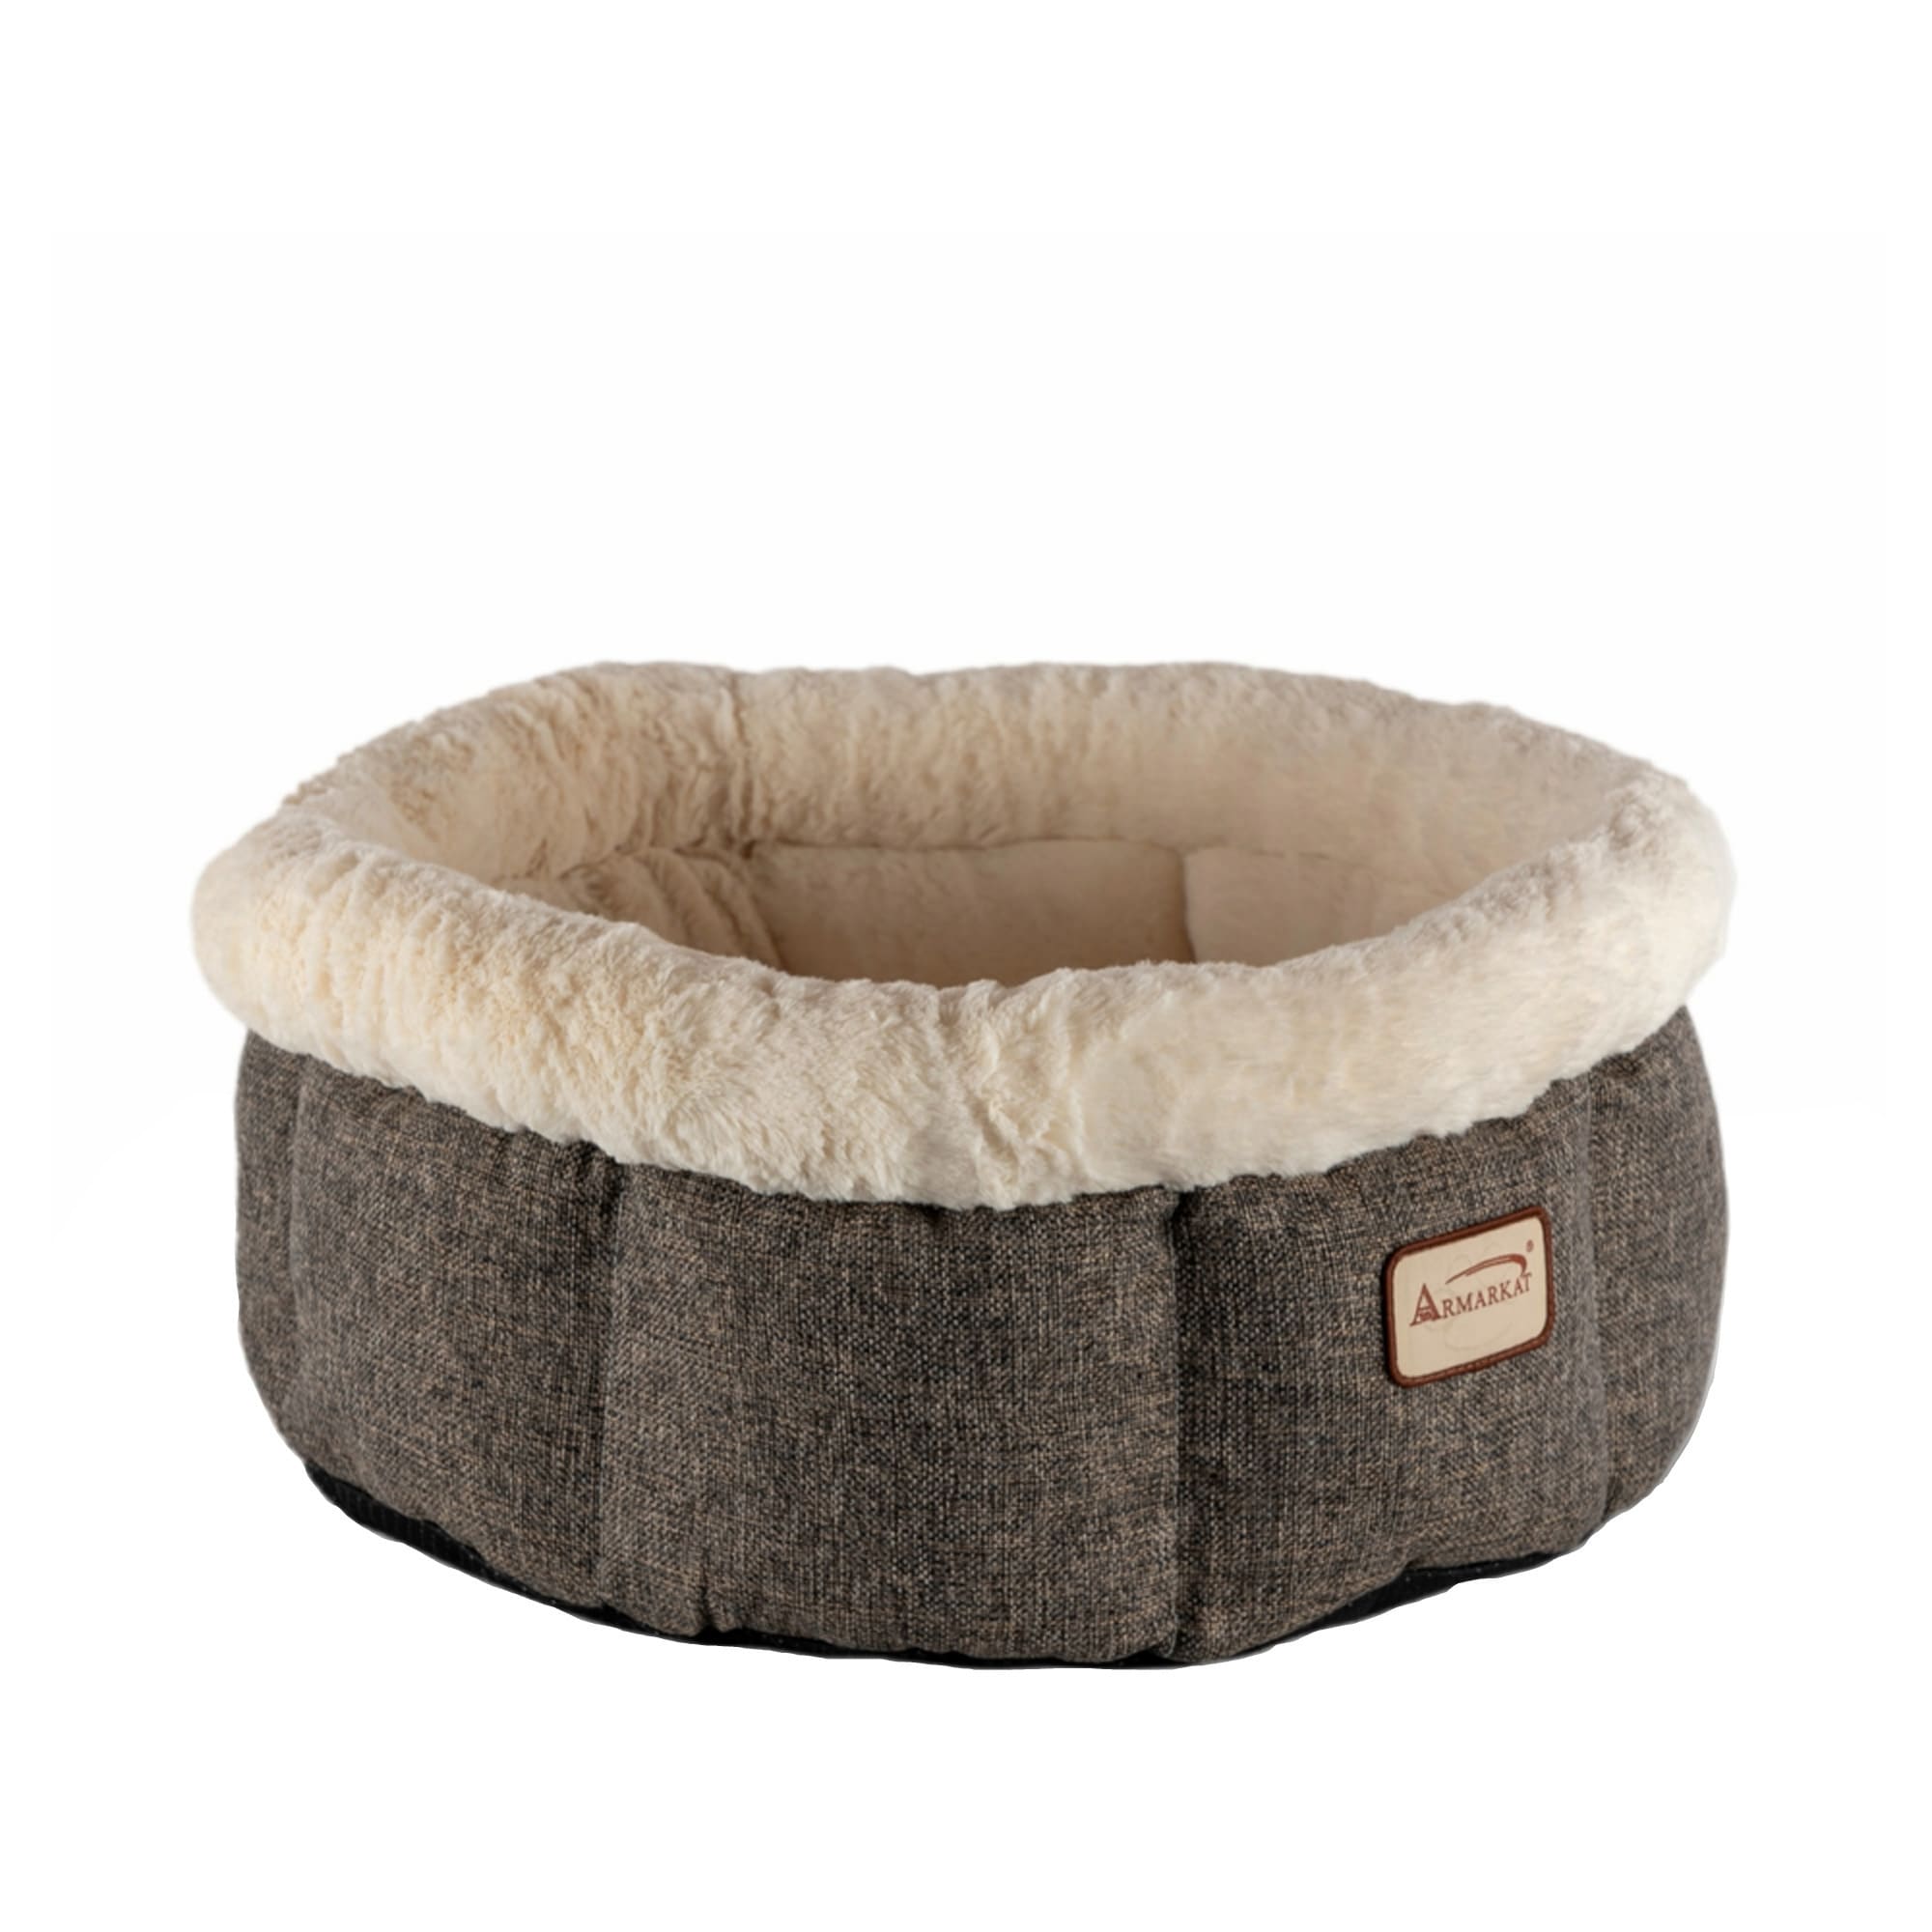 Armarkat Cozy Beige and Gray Cat Bed, 19.5